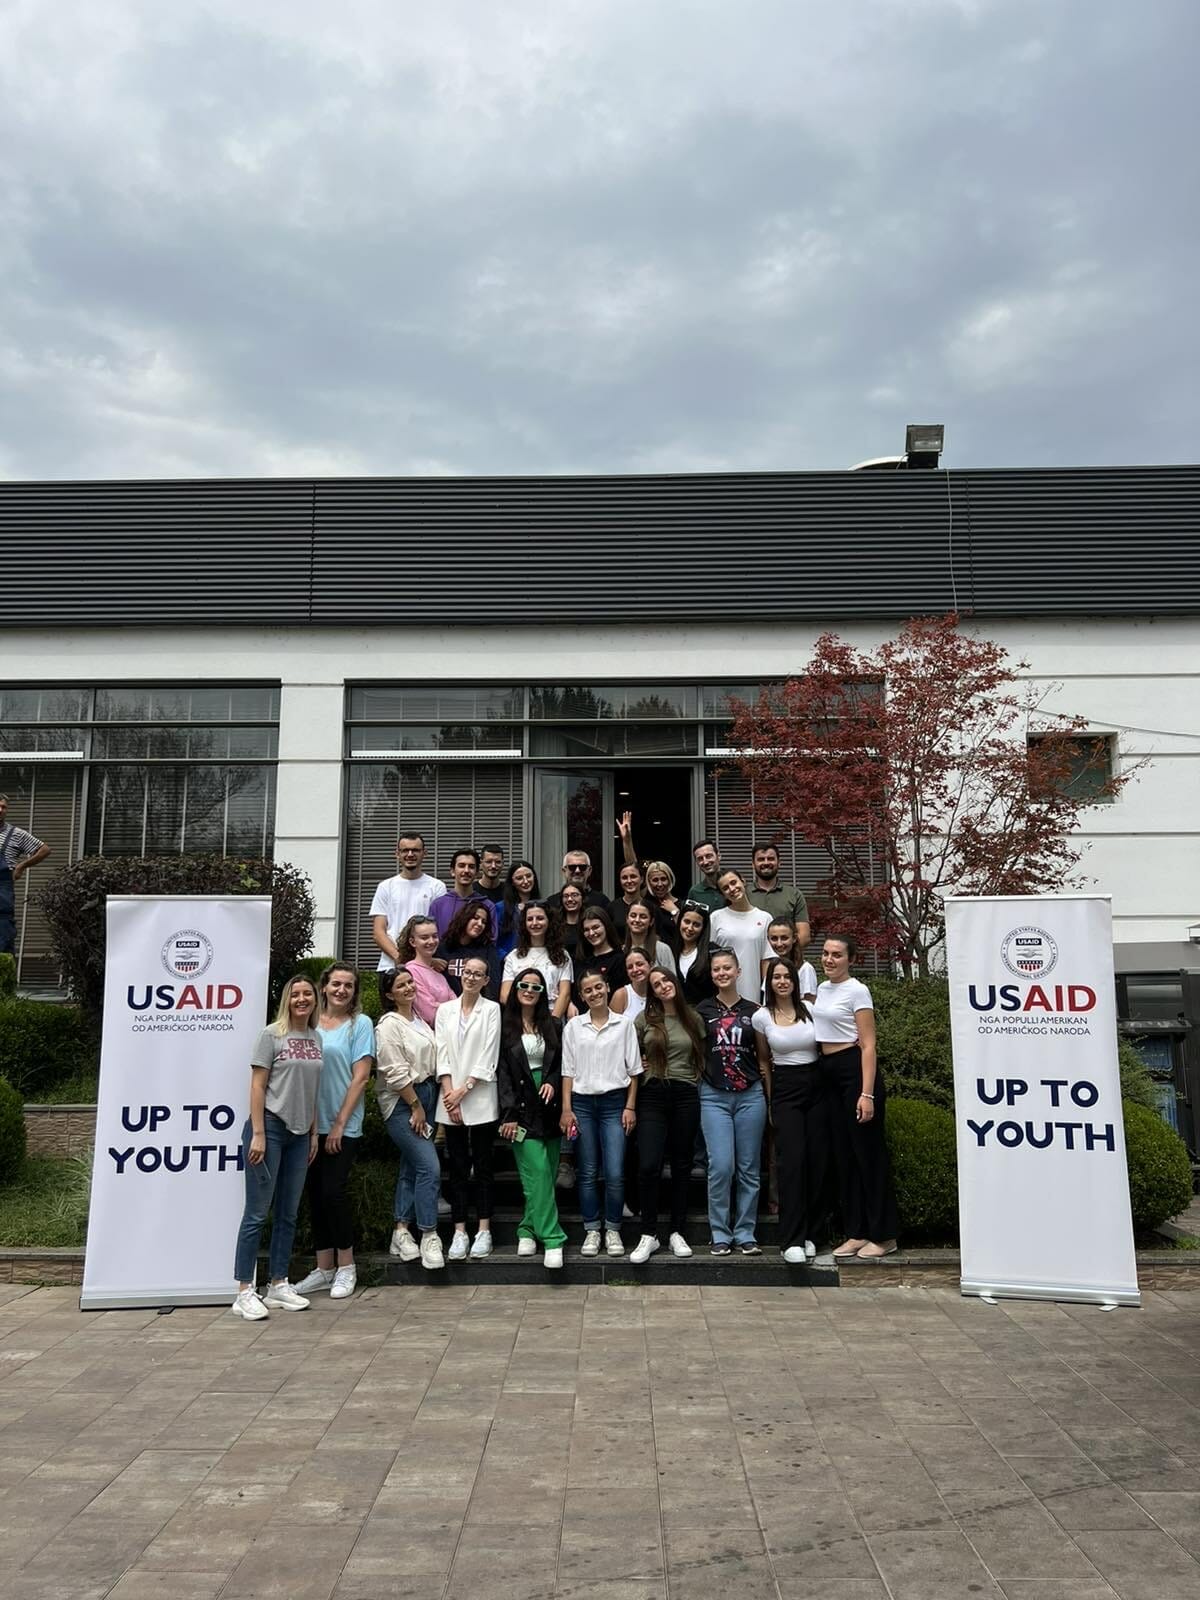 Group of Up To Youth program participants in Kosovo.